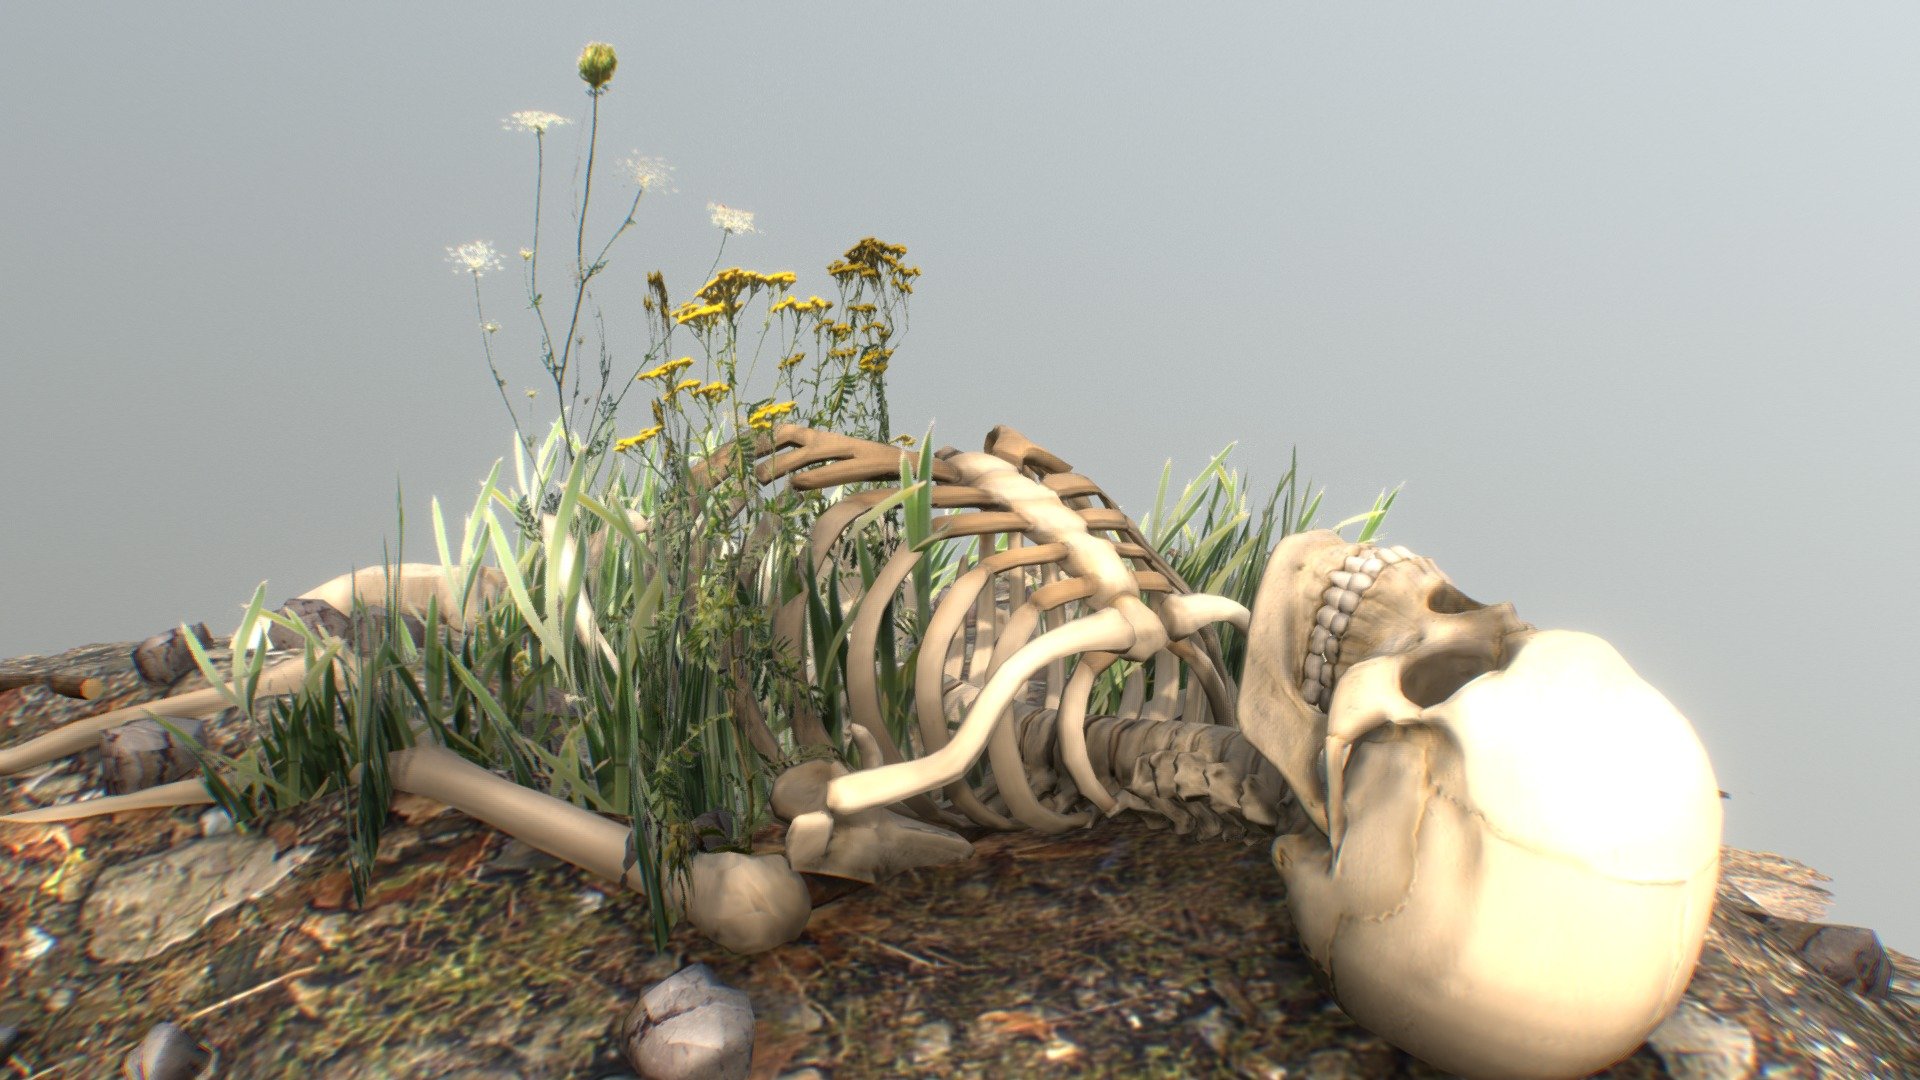 Study creating models and textures of nature environment: plants, rocks, etc. and proper composition. 

Blender, Zbrush - modeling 

Unfold3D, Photoshop, ShaderMap - textures 

Skeleton: https://skfb.ly/SsKv - Remains - Download Free 3D model by seenoise 3d model